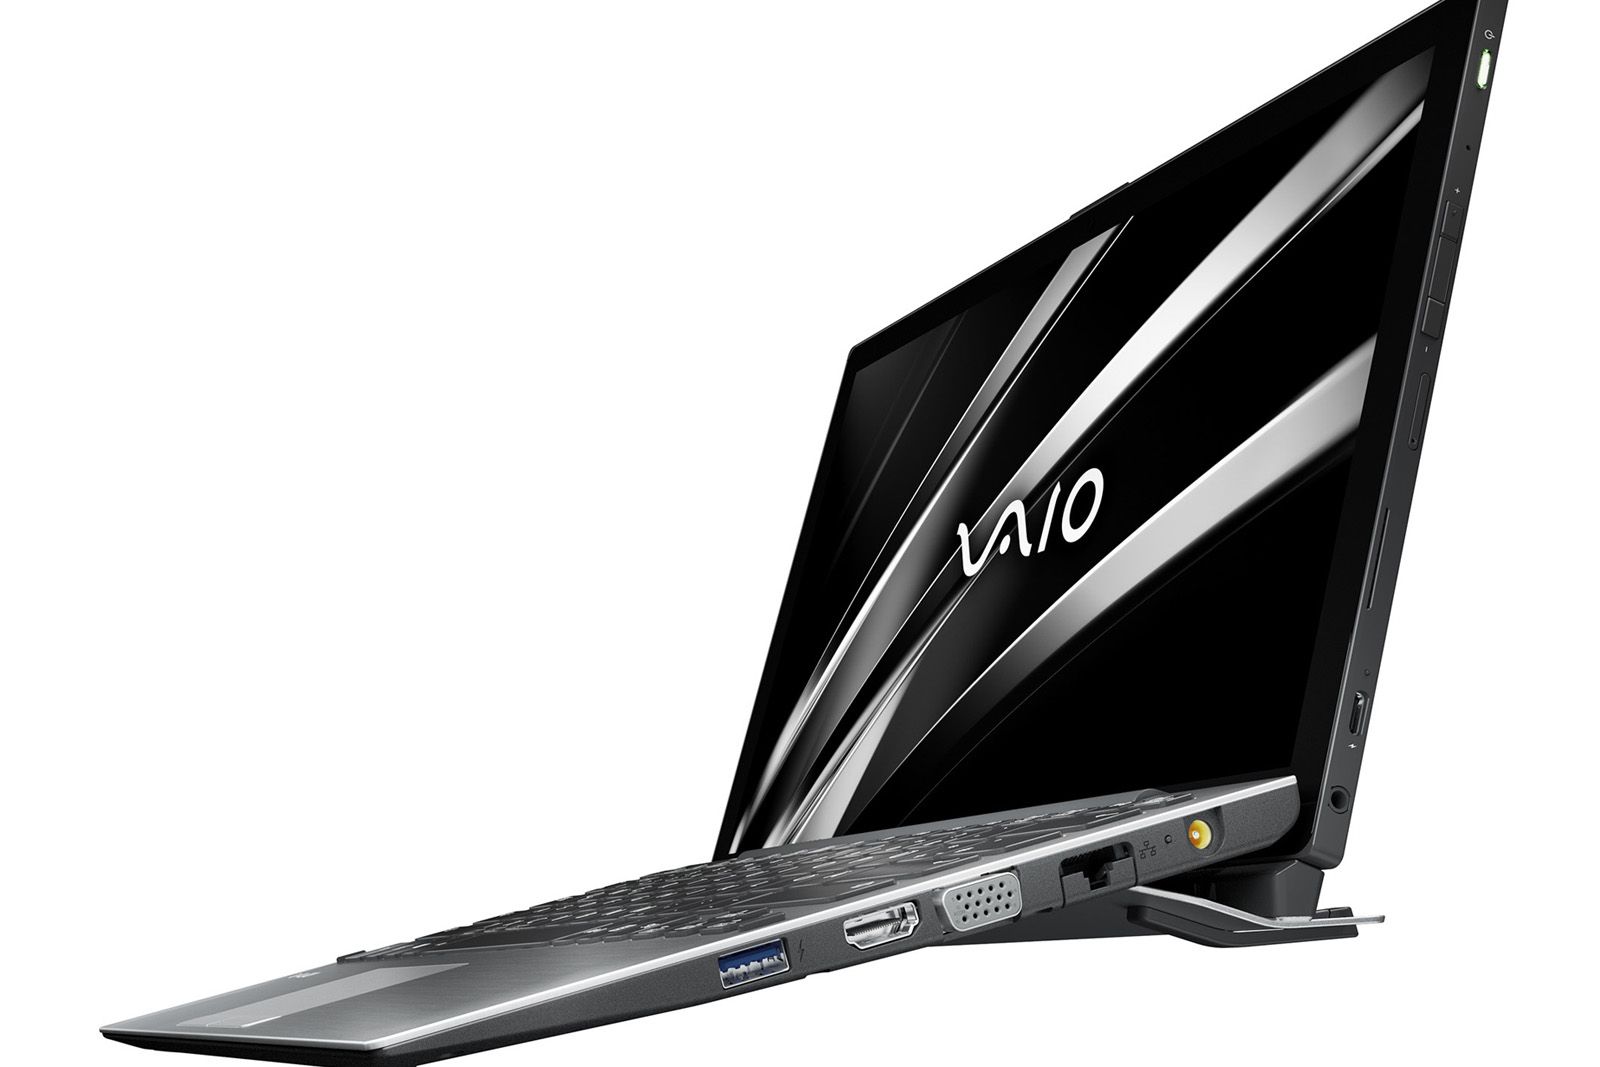 Theres a new Vaio laptop and a 2-in-1 too image 2